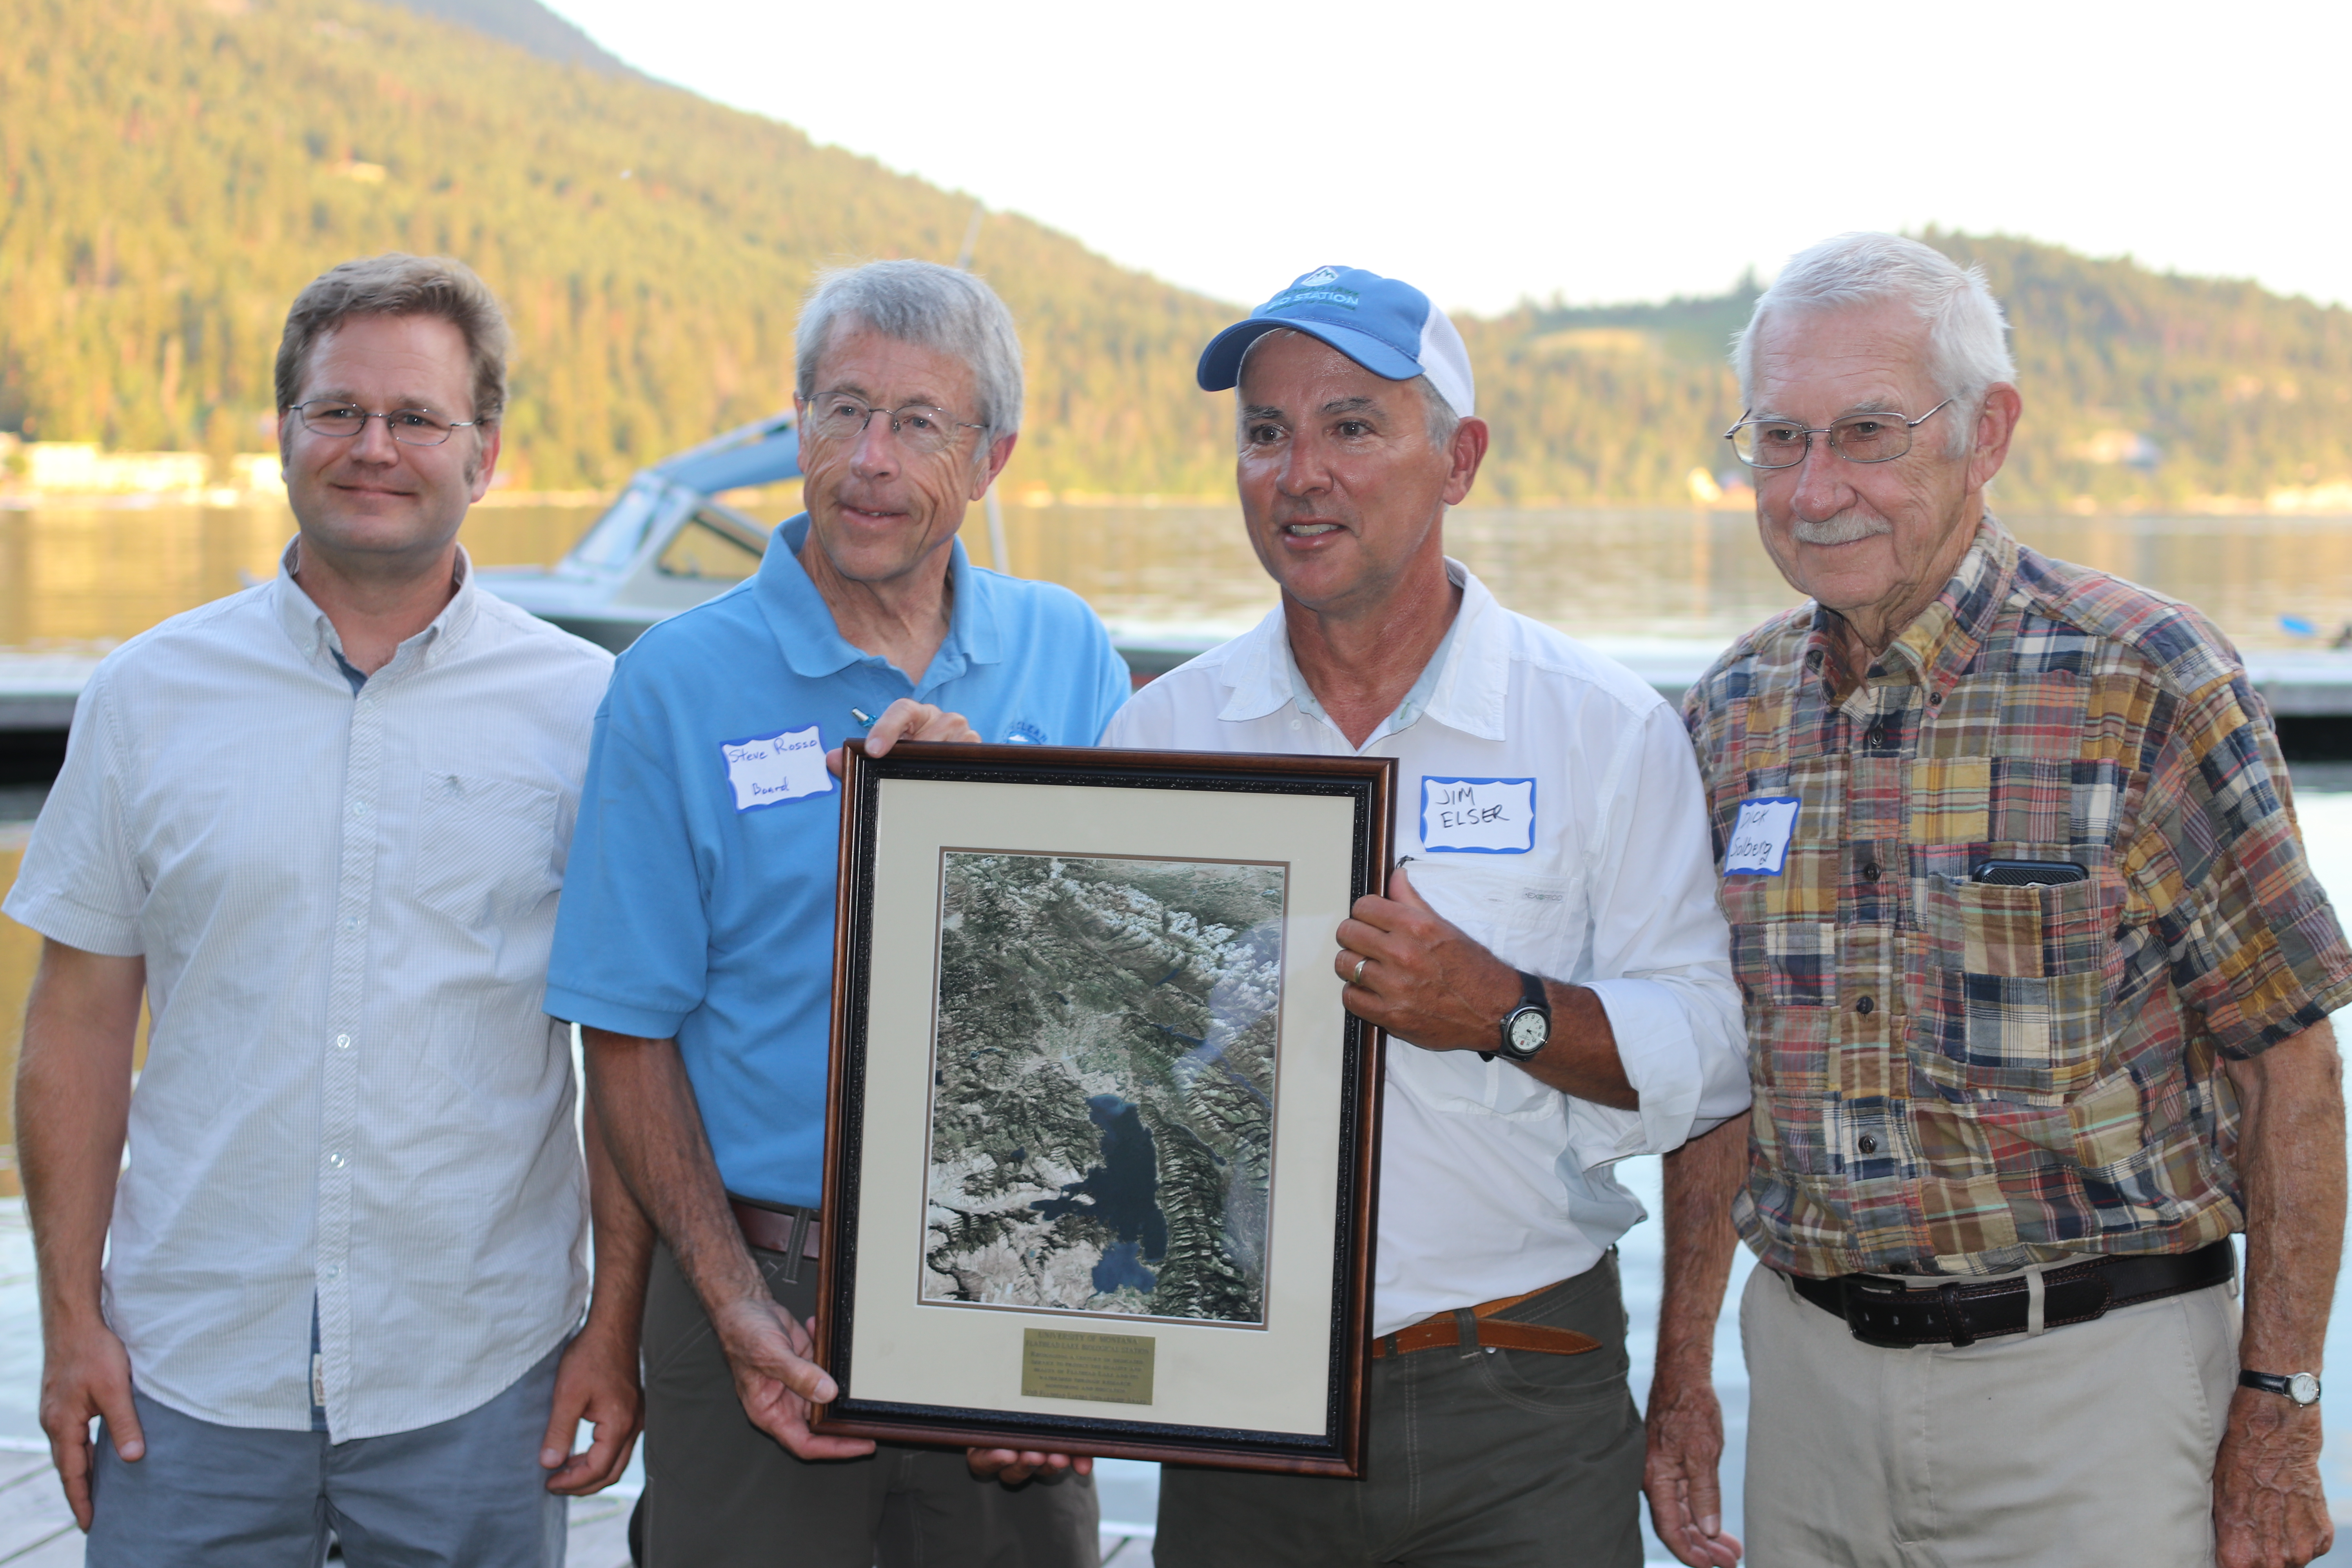 Flathead Lakers president Steve Rosso presents the 2018 Flathead Lakers Stewardship award to FLBS Assistant Director Tom Bansak, FLBS Director Jim Elser, and former FLBS Director Dick Solberg